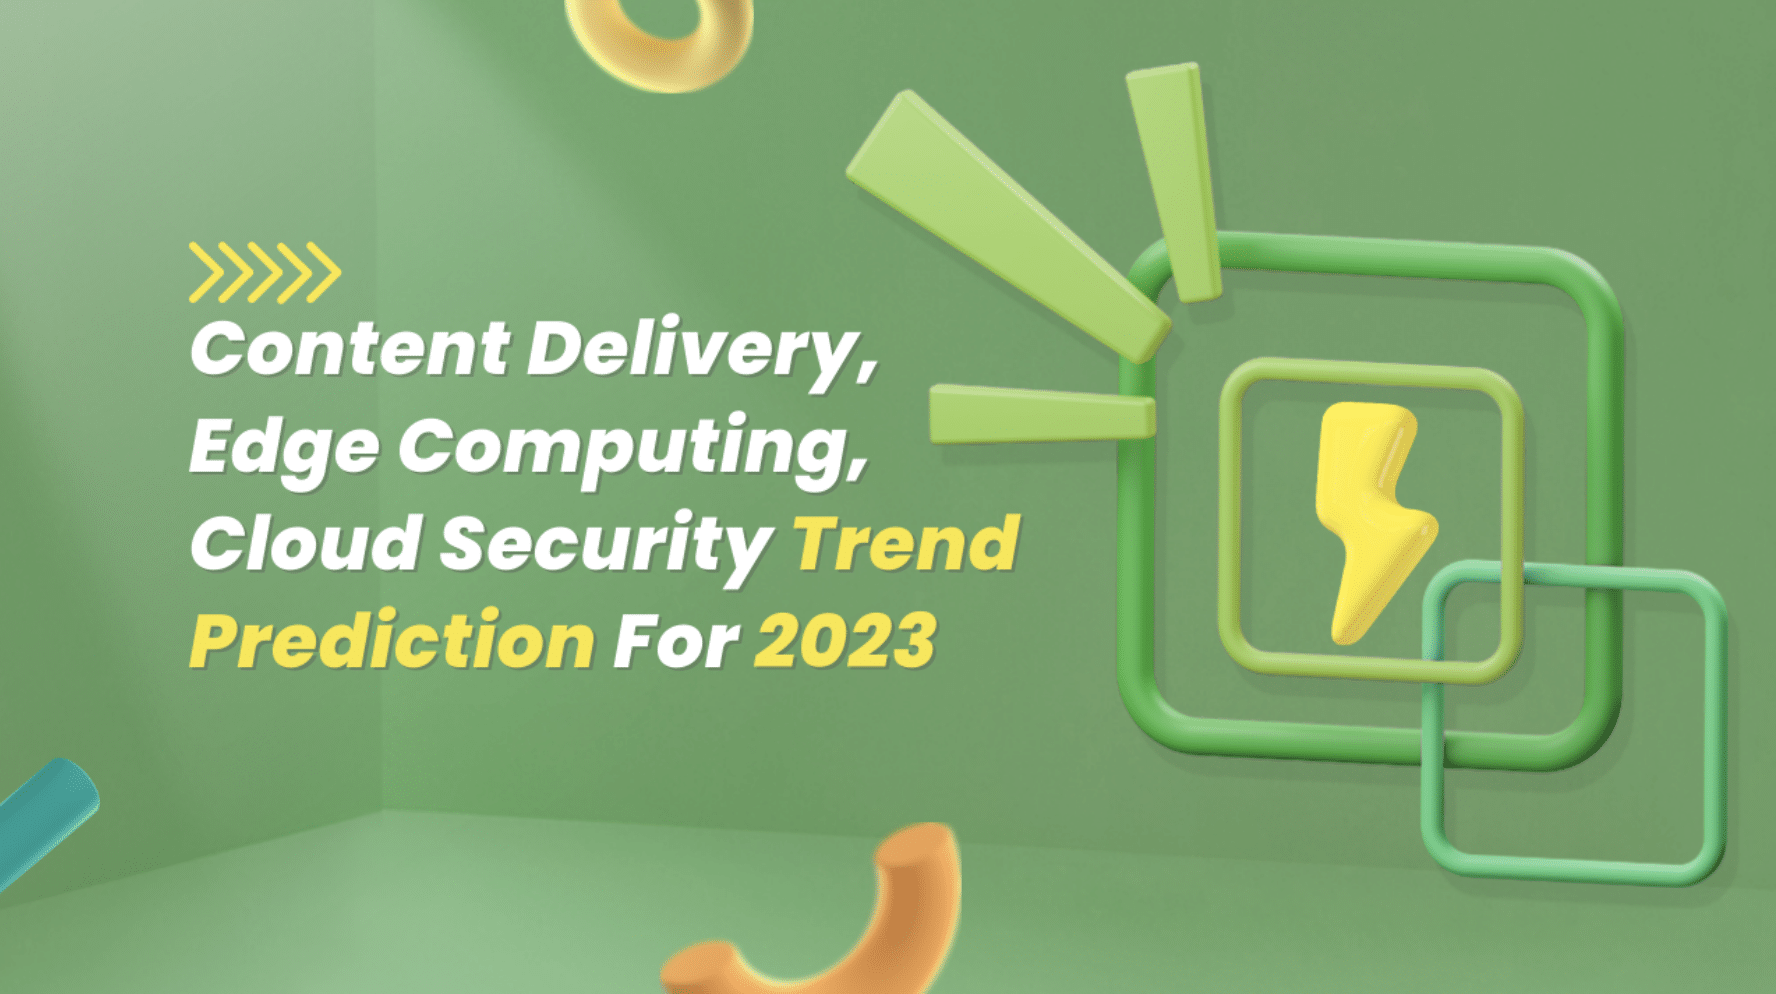 Content Delivery, Edge Computing & Cloud Security Trend Prediction for 2023